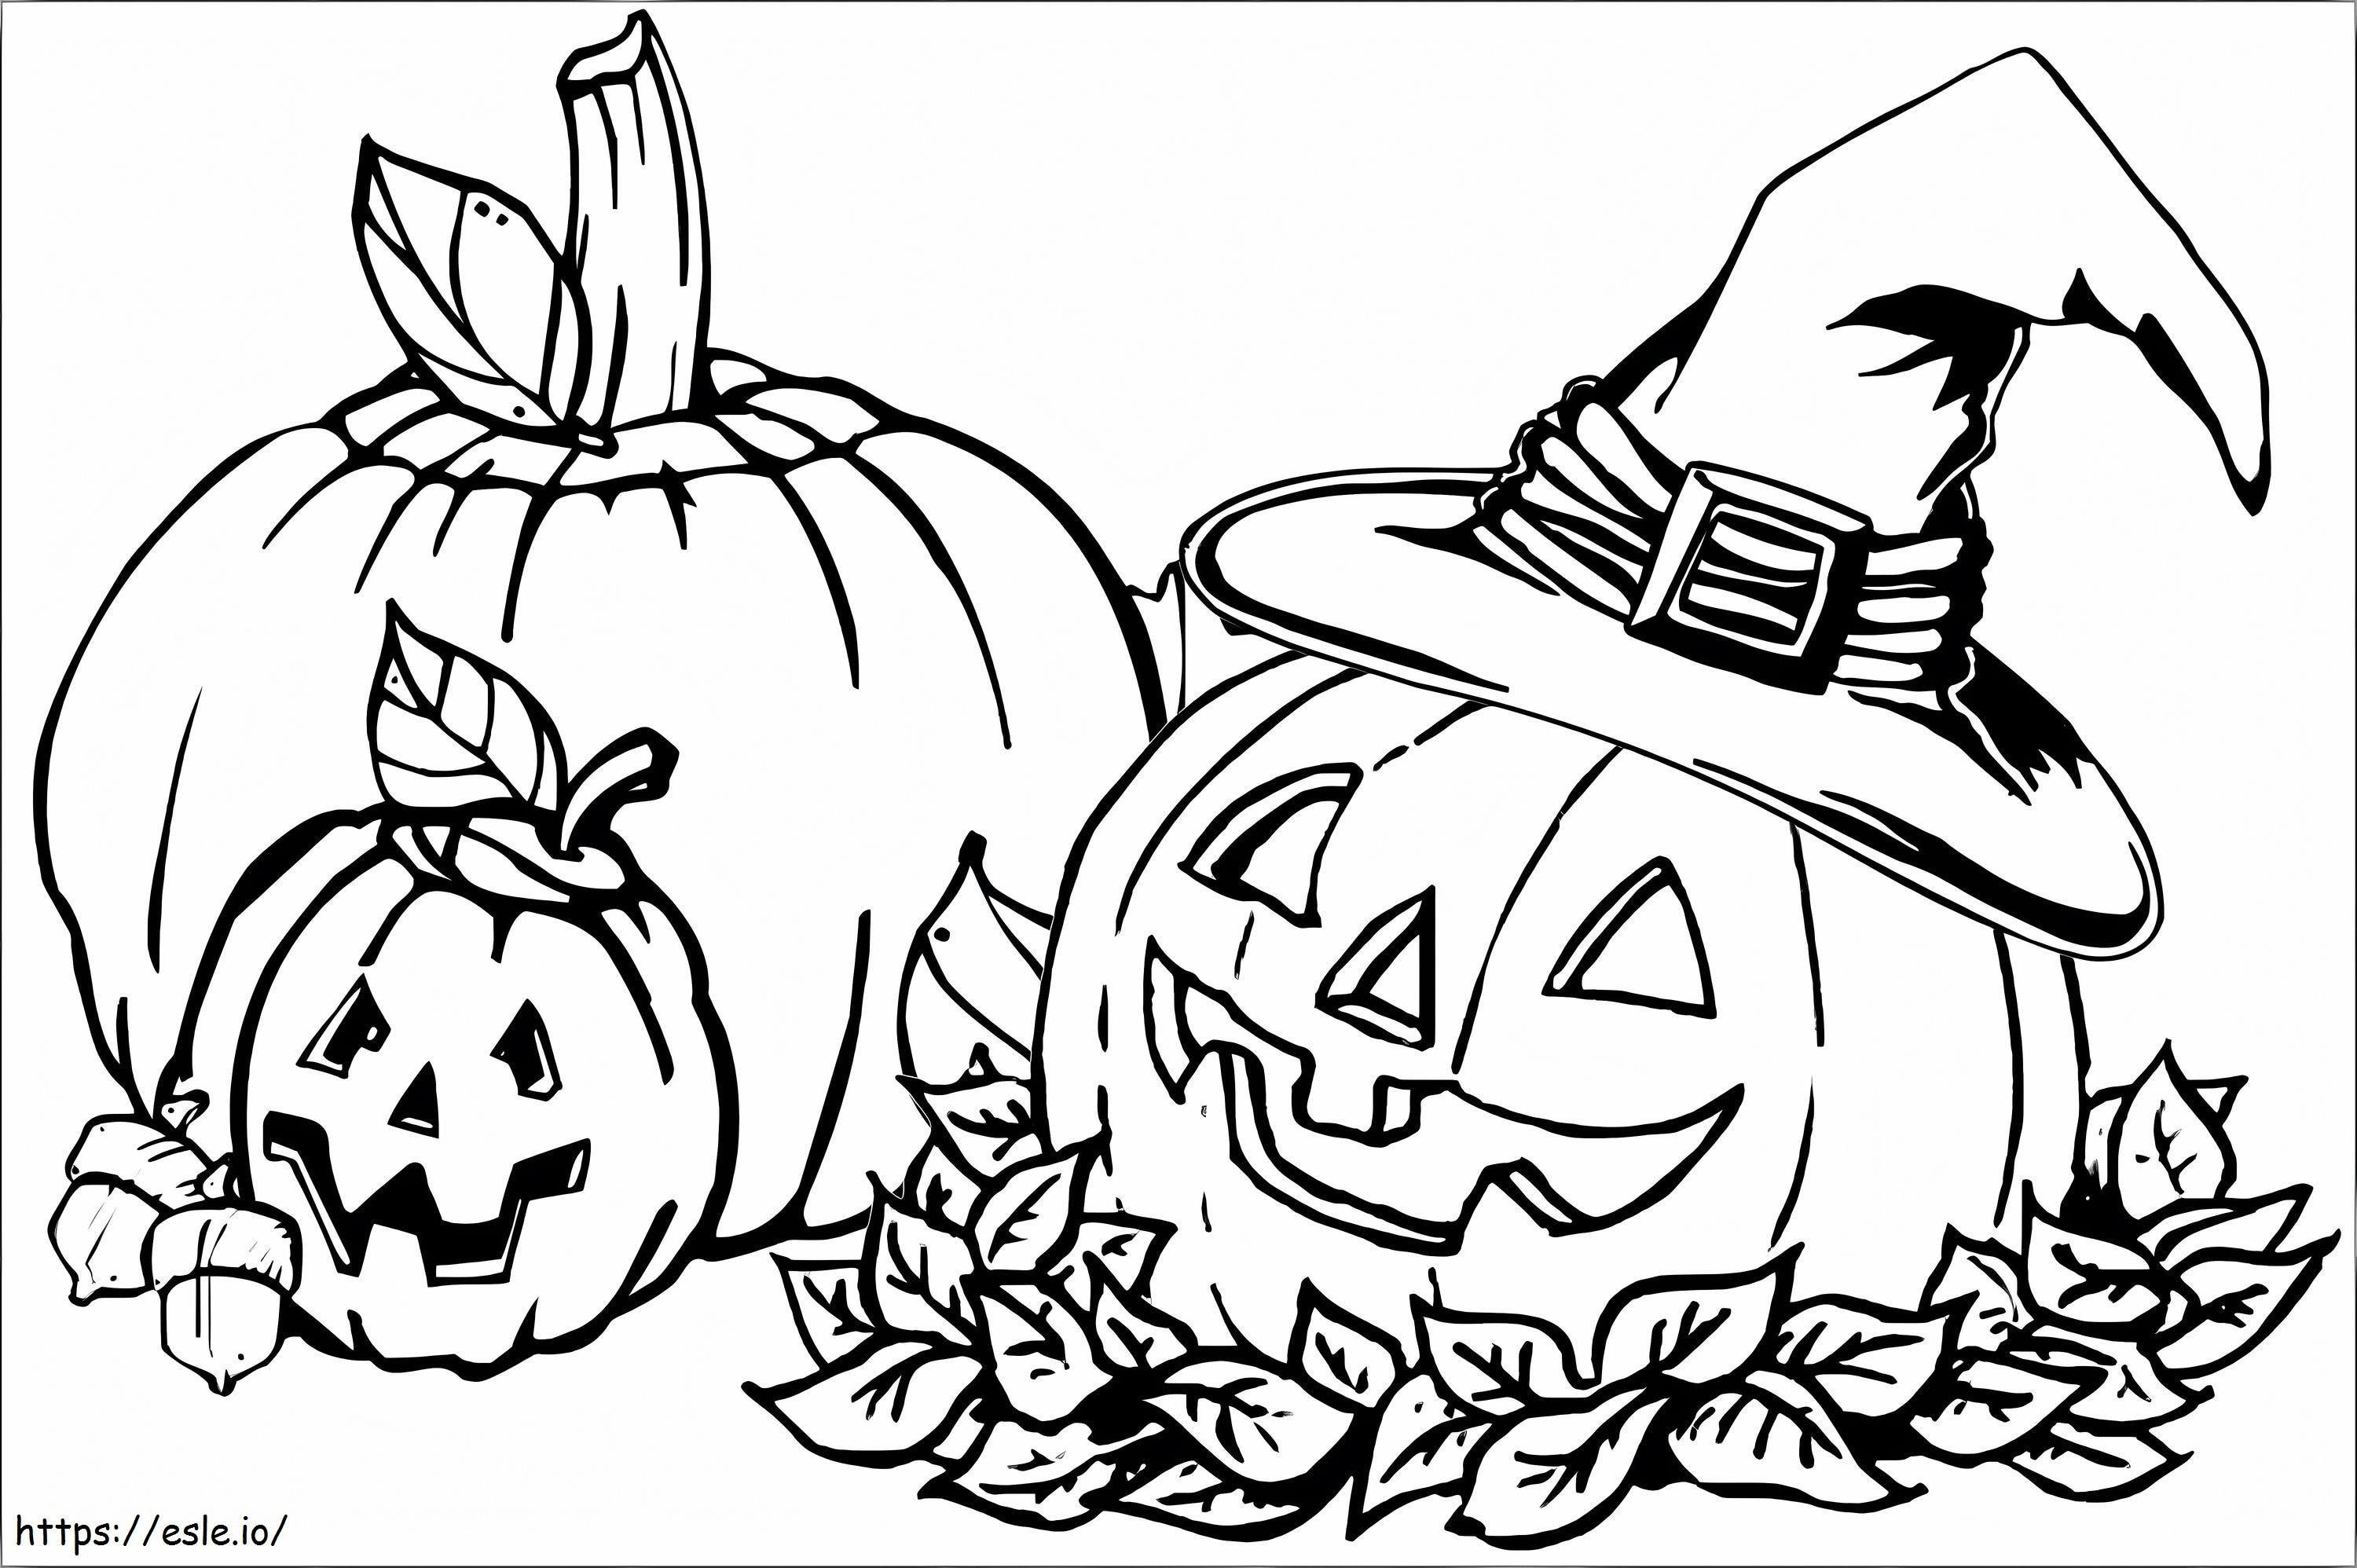 Perfect Pumpkin coloring page